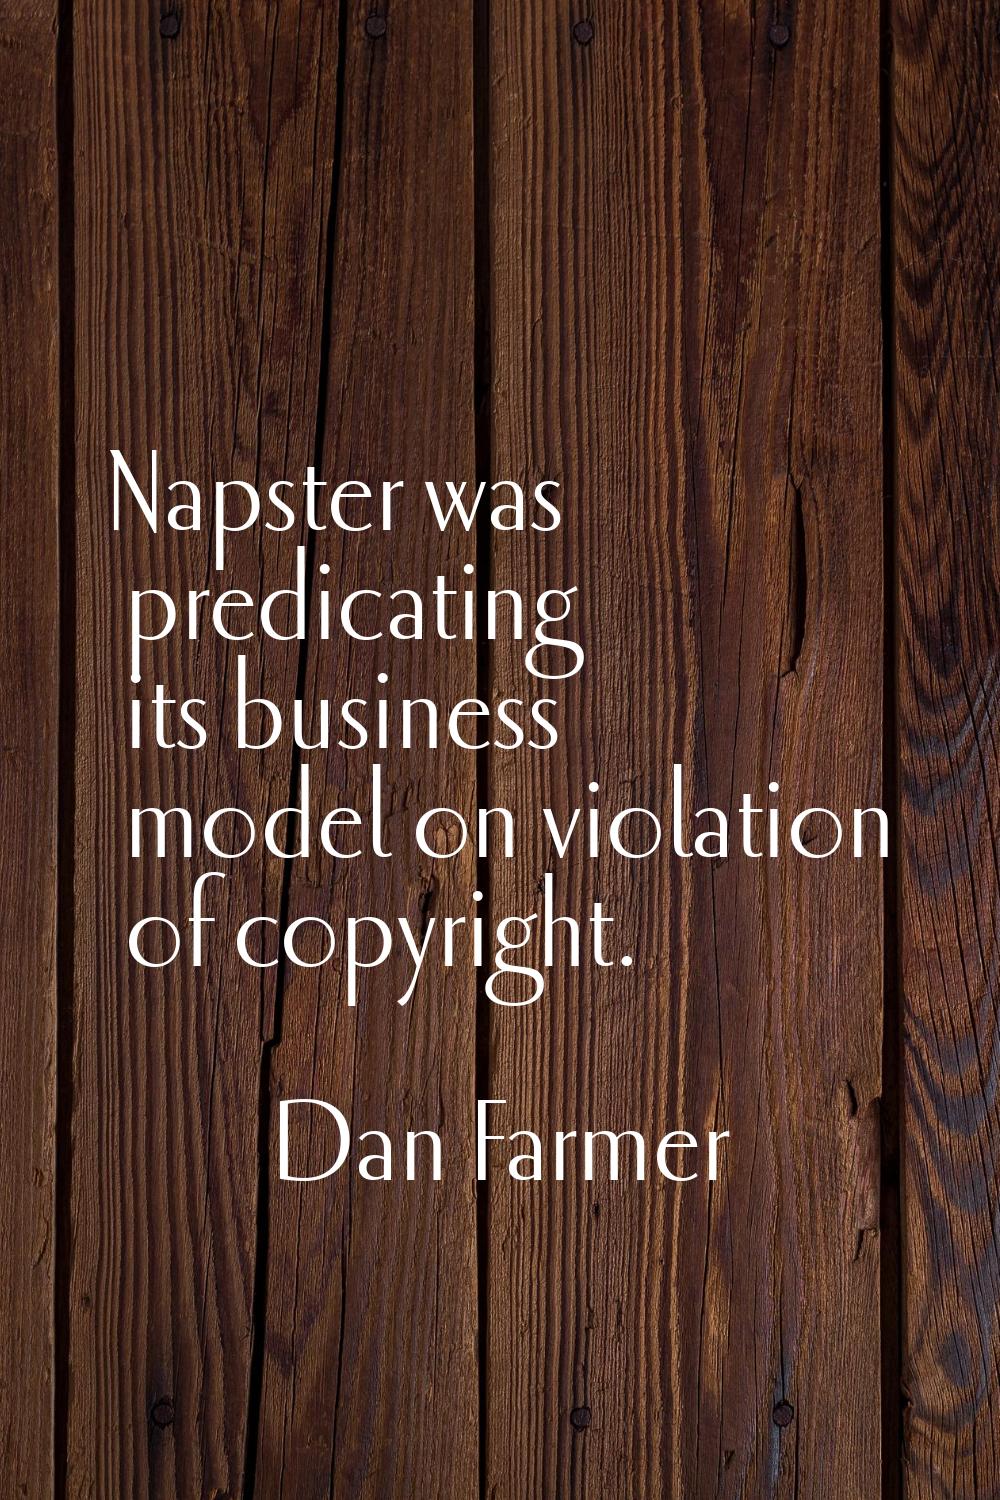 Napster was predicating its business model on violation of copyright.